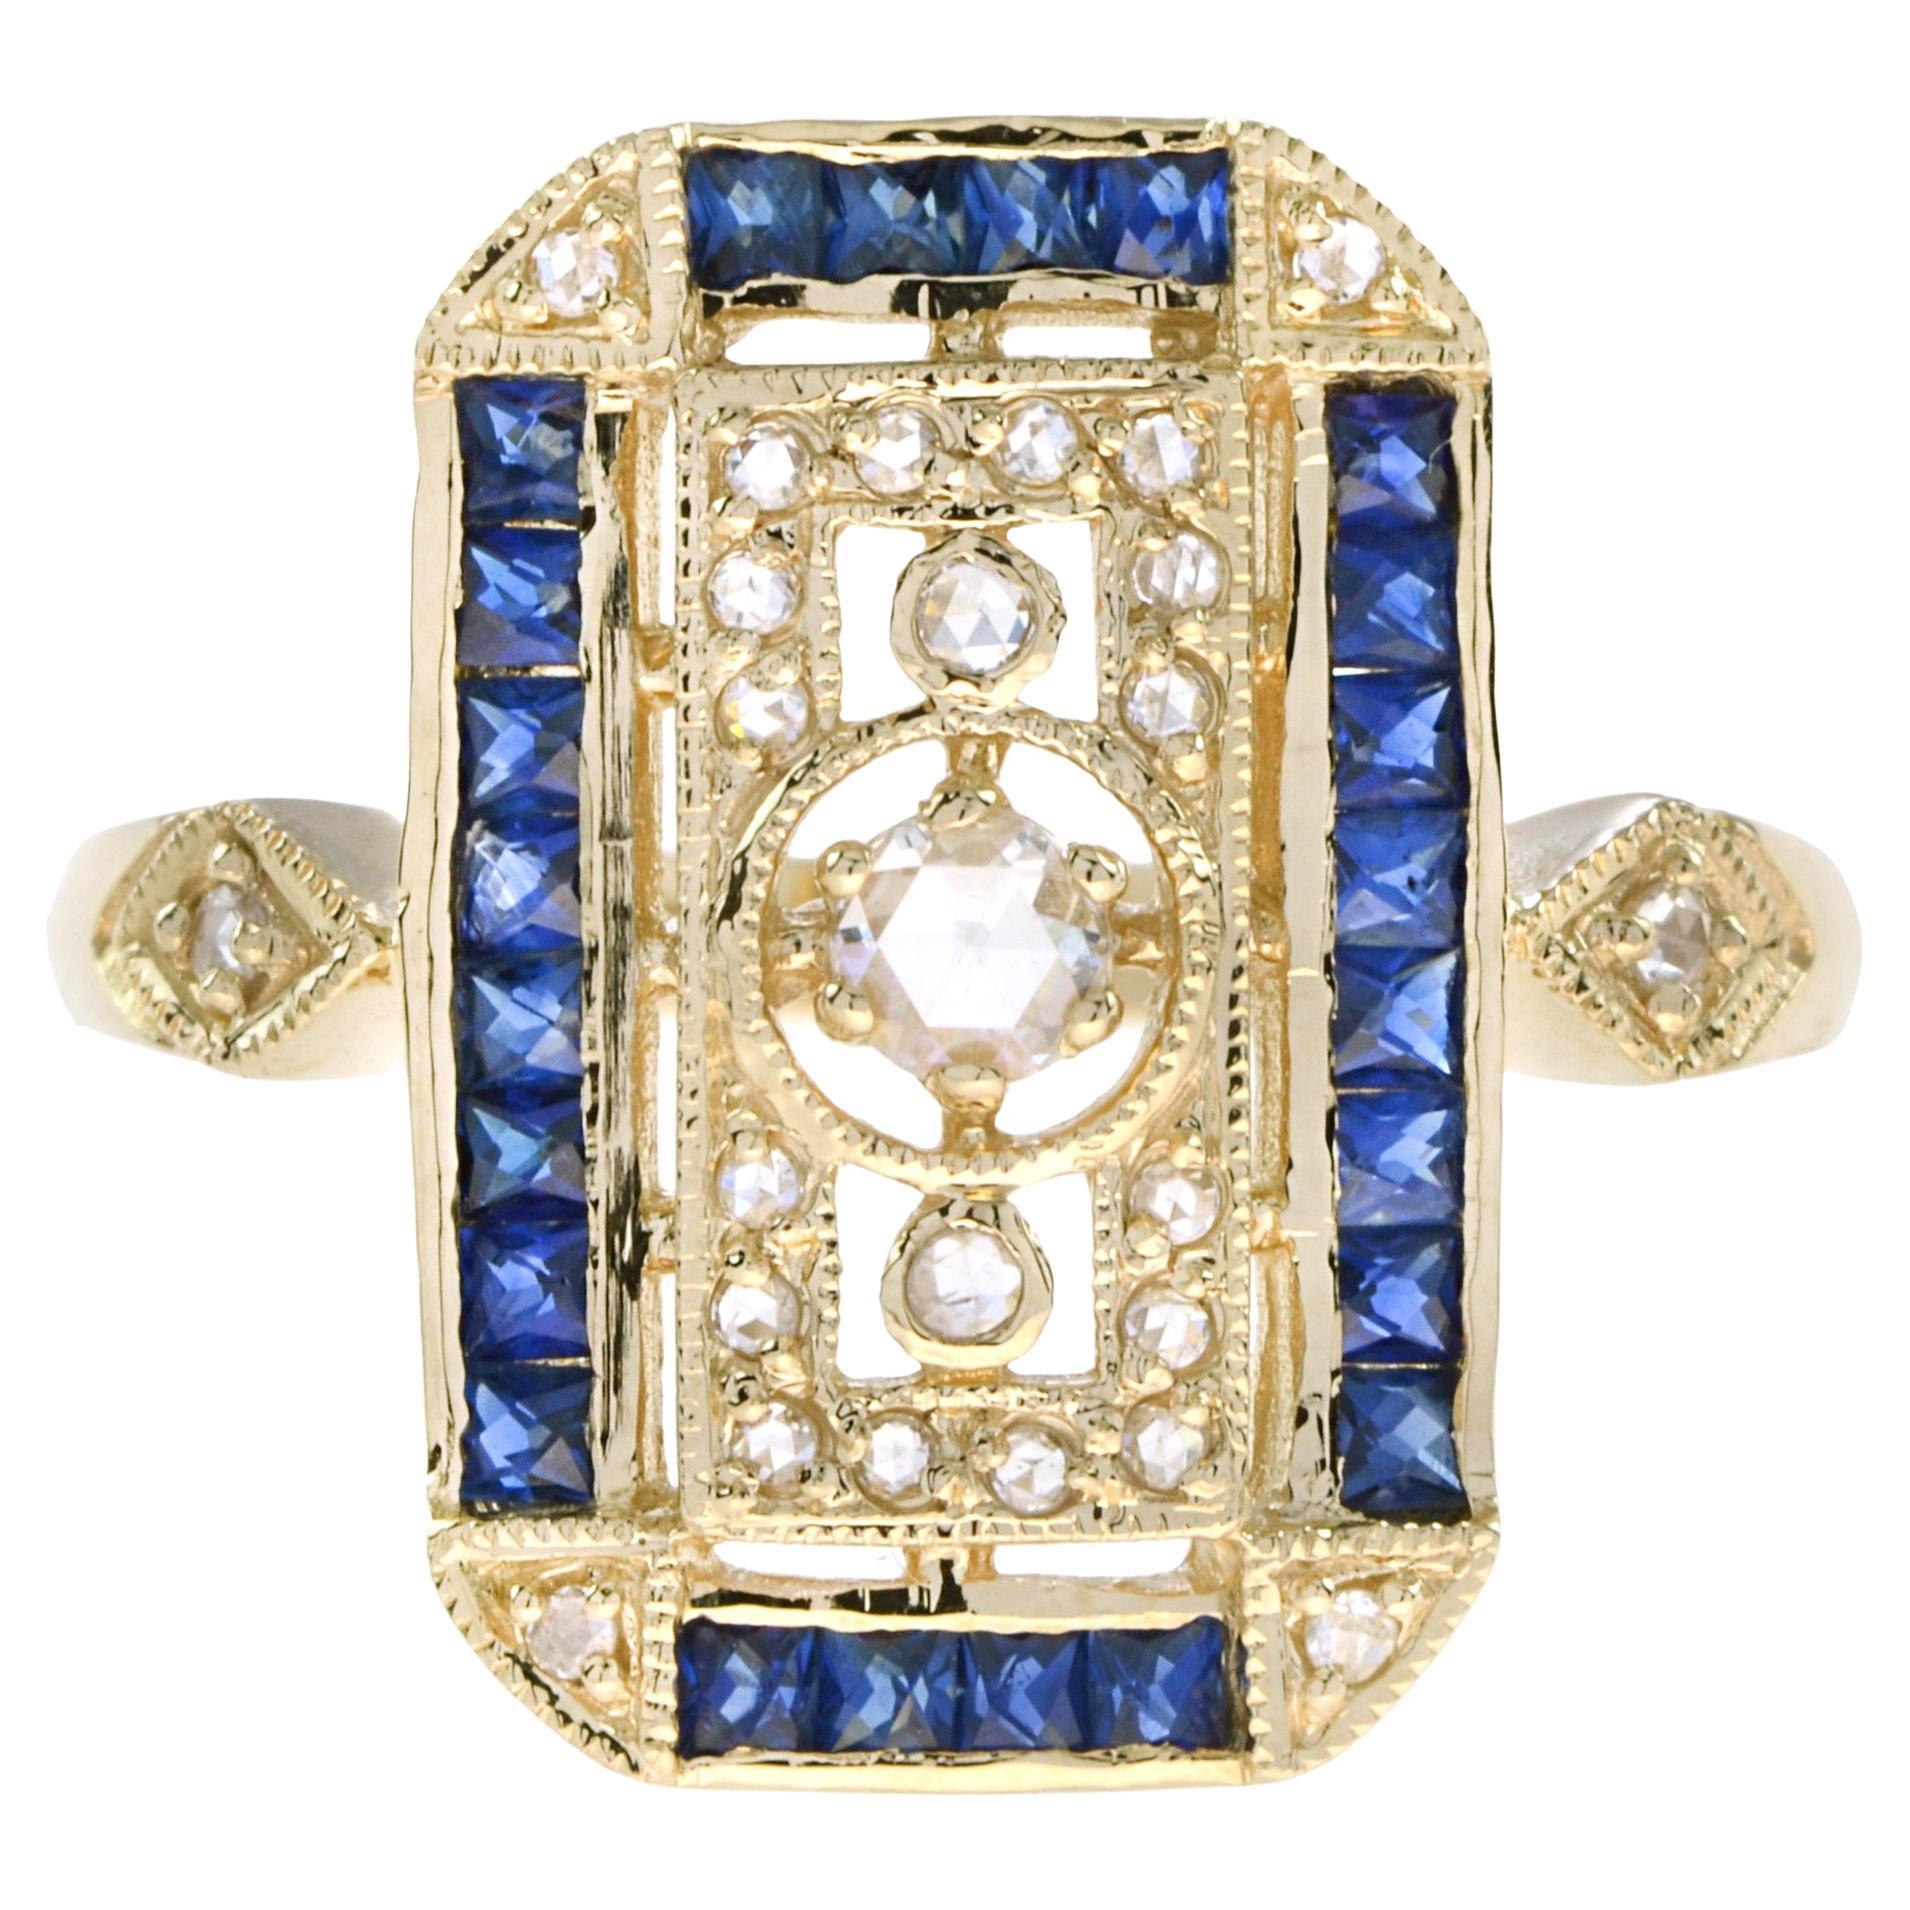 For Sale:  Old Cut Diamond and Sapphire Antique Style Filigree Ring in 14K Yellow Gold